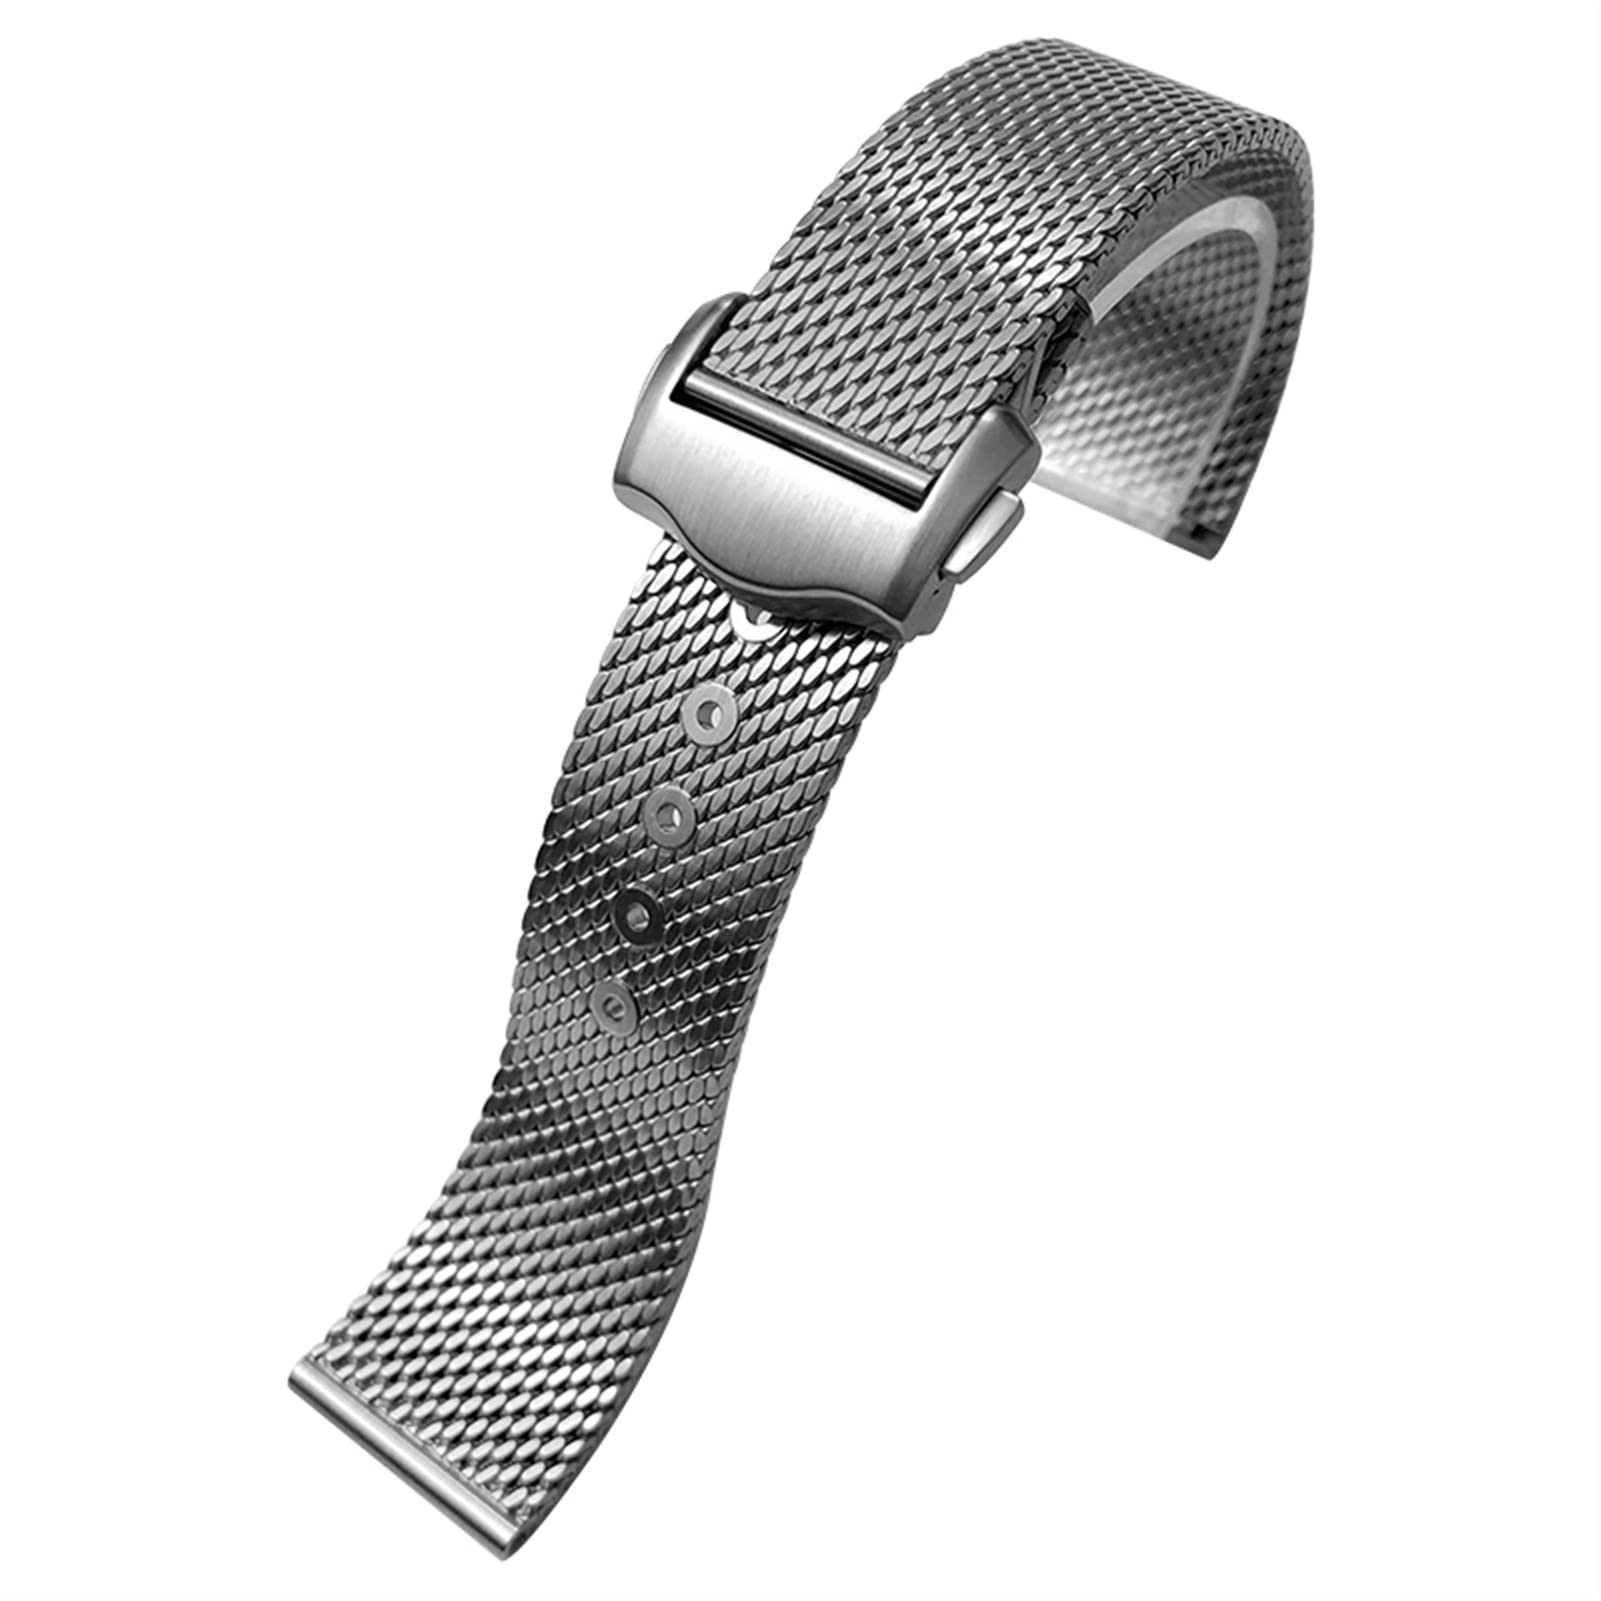 AMSOH 20mm Titanium Steel Braided Watchband Fit for Omega 007 Seamaster James Bond Watch Band Strap Deployment Buckle